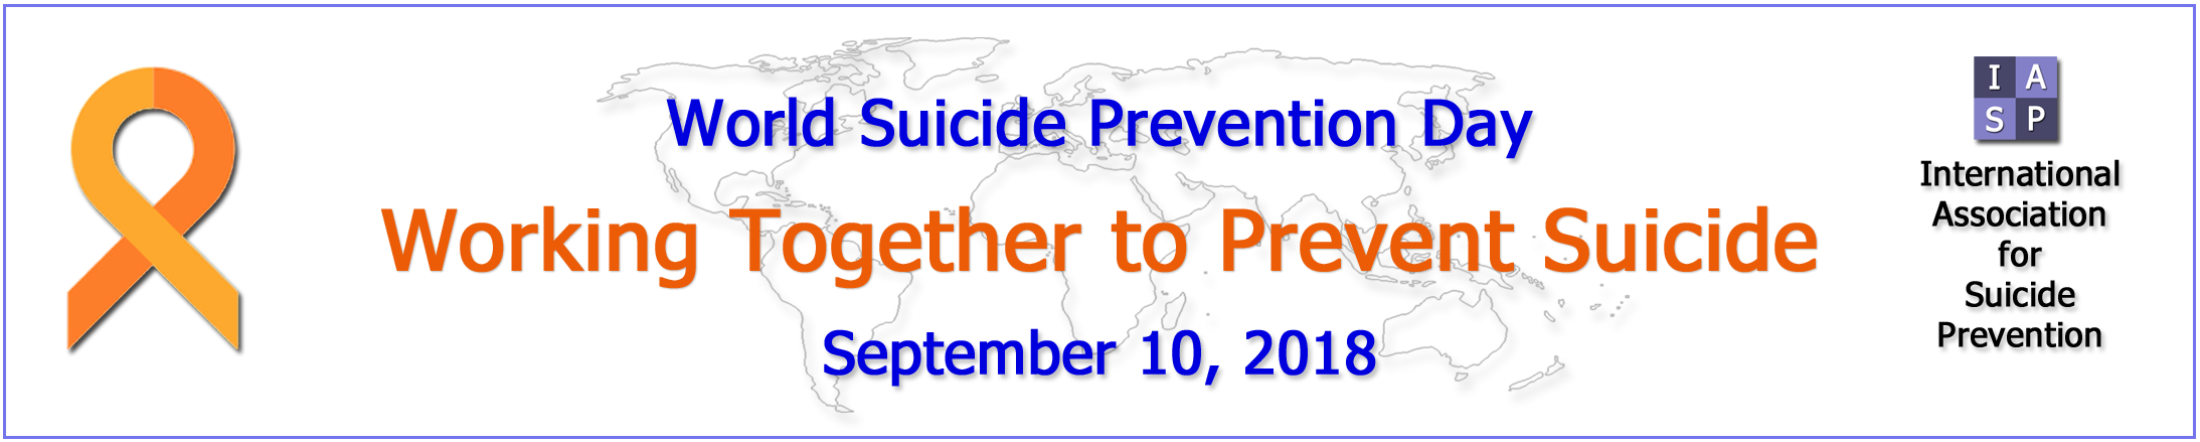 Local organisations are working together to prevent suicide